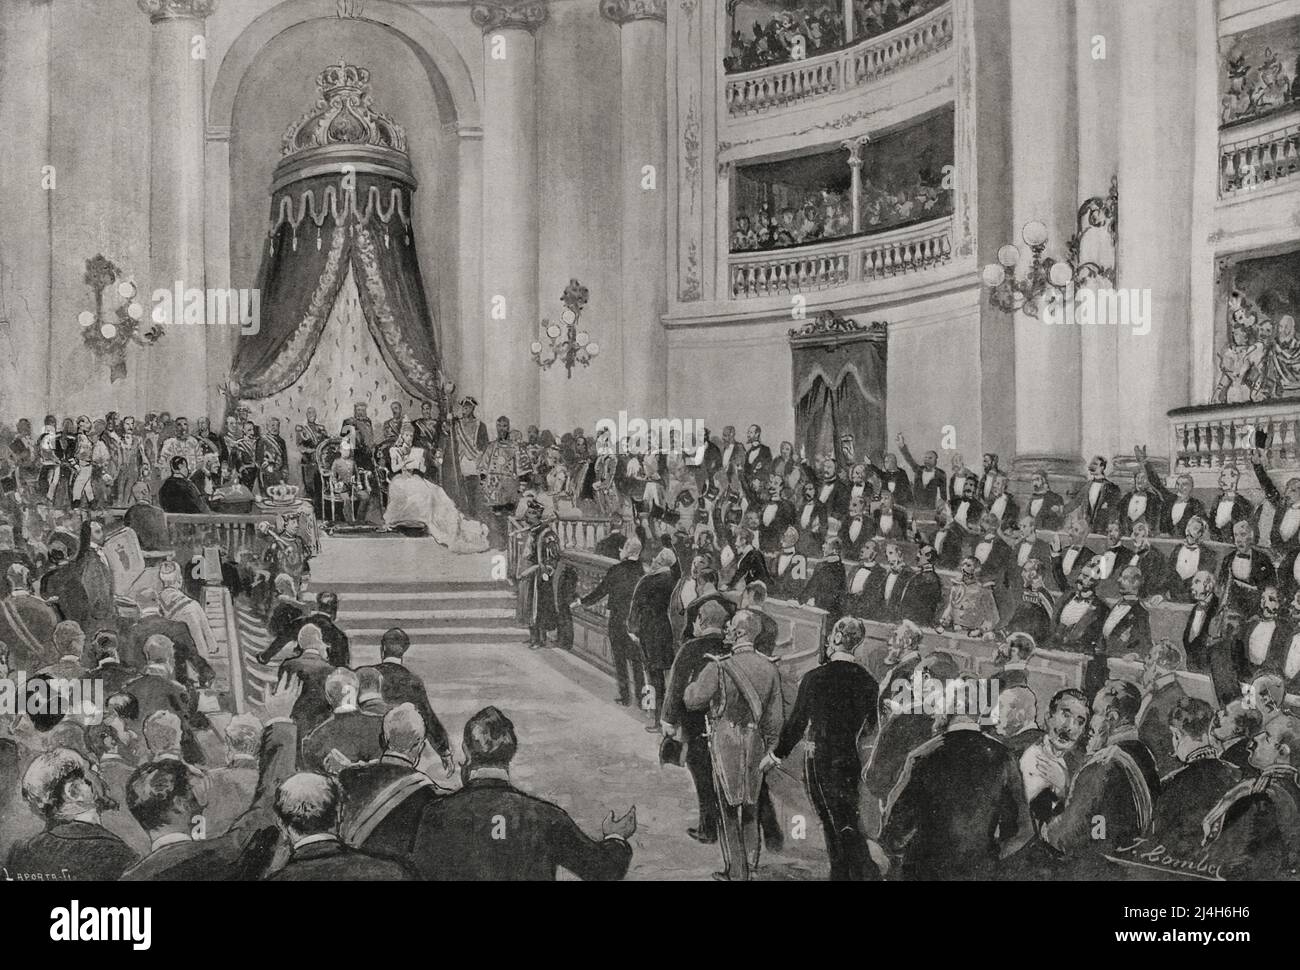 History of Spain. Madrid. Regency of Maria Cristina de Hasburgo-Lorena (1885-1902). The Opening of the Parliament in the Senate (20 April 1898) presided over by the Queen Regent Maria Cristina de Habsburgo-Lorena and her son Alfonso XIII. Ovation for the Queen Regent during the reading of her speech. Photoengraving. La Ilustración Española y Americana, 1898. Stock Photo